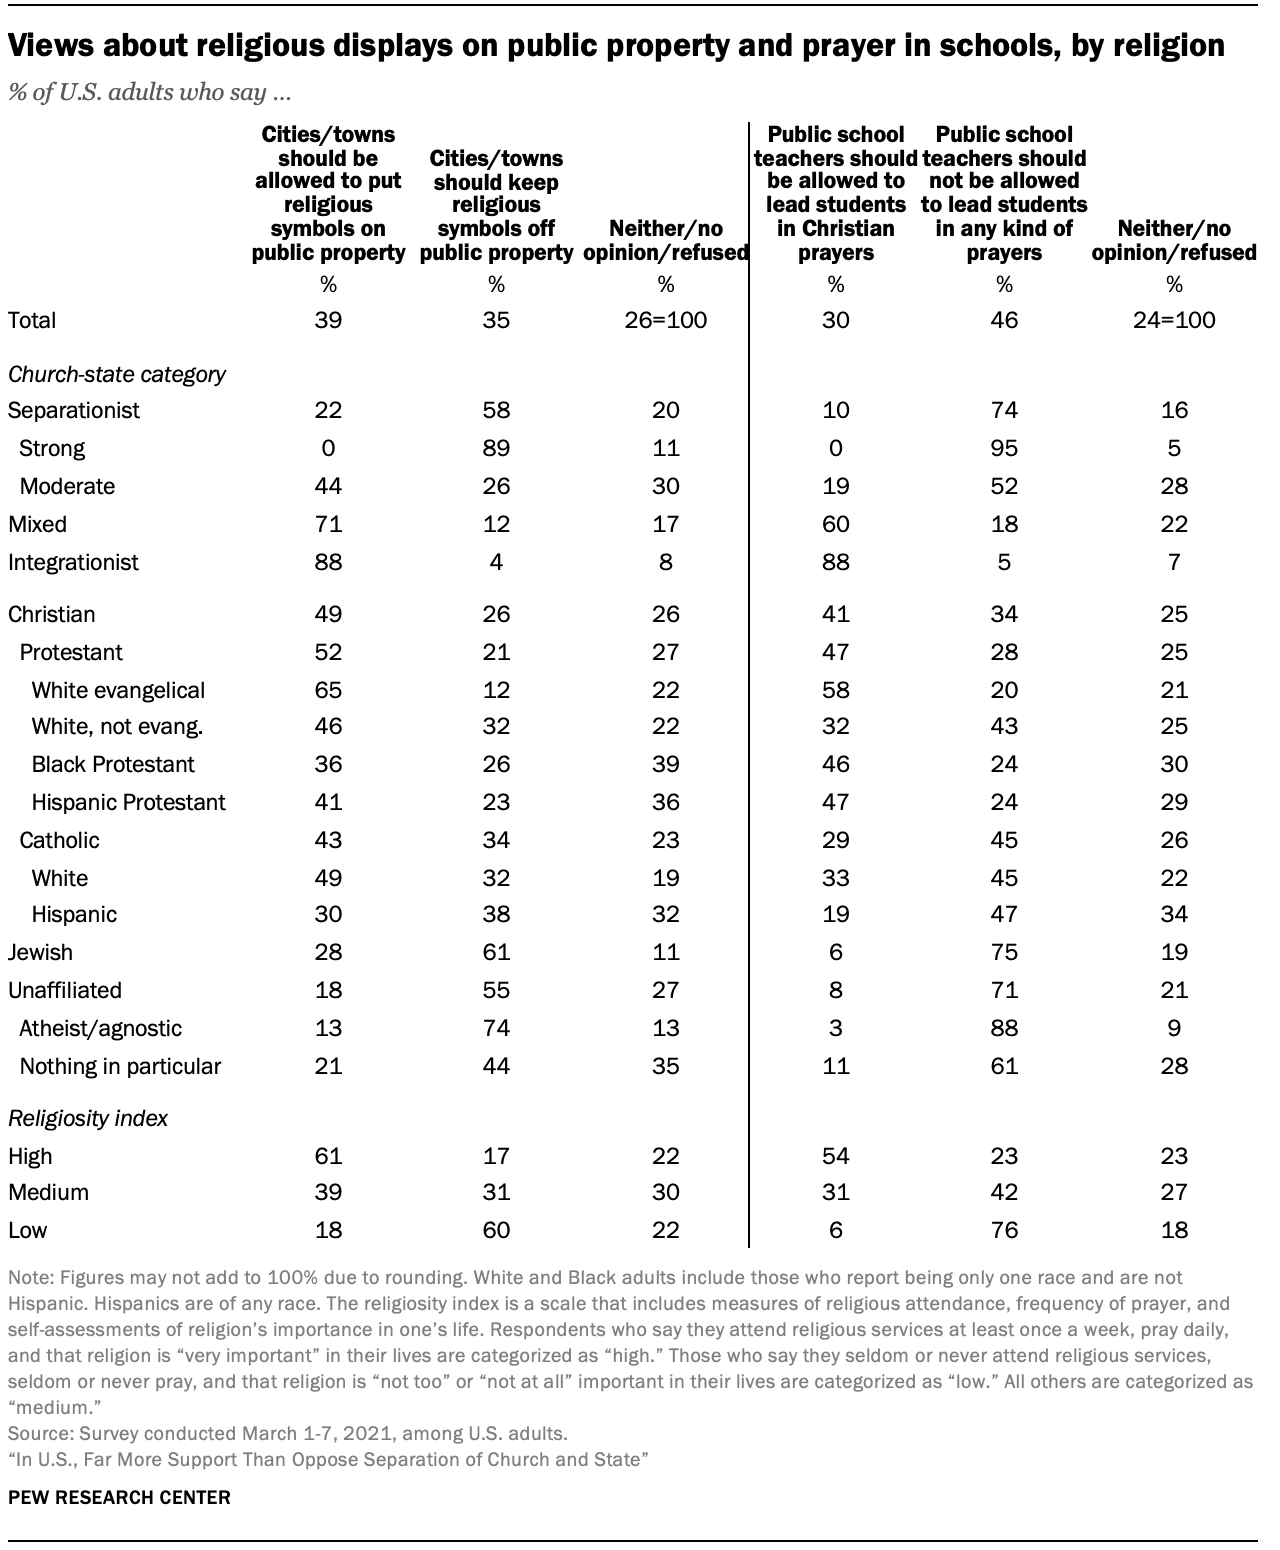 Views about religious displays on public property and prayer in schools, by religion